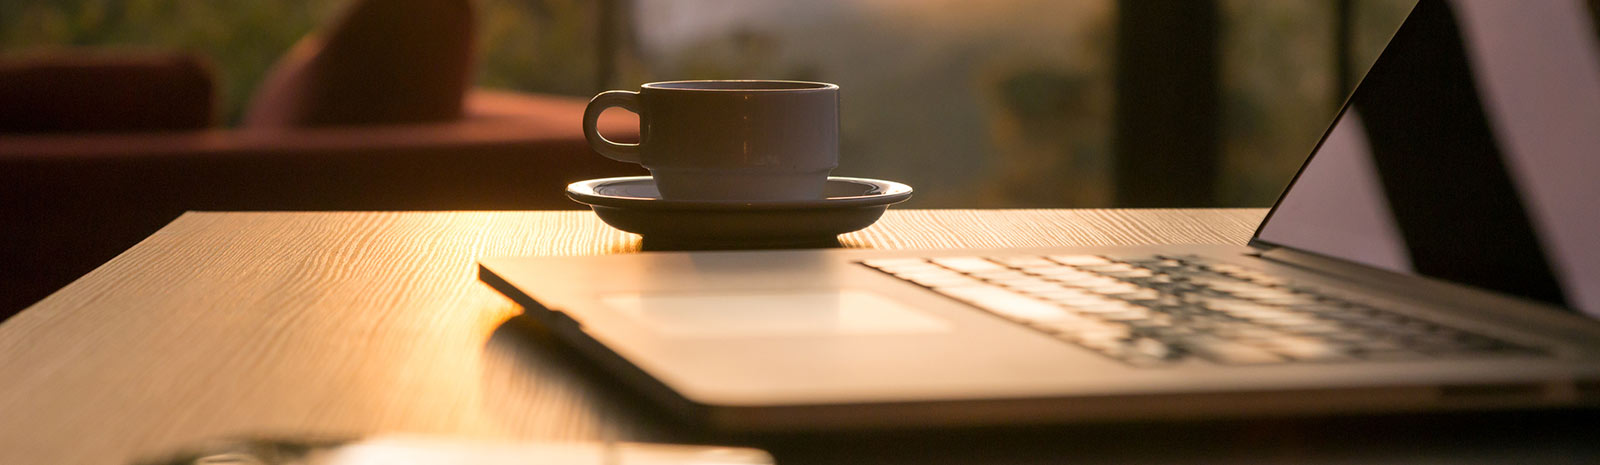 Close up of a laptop and coffee cup